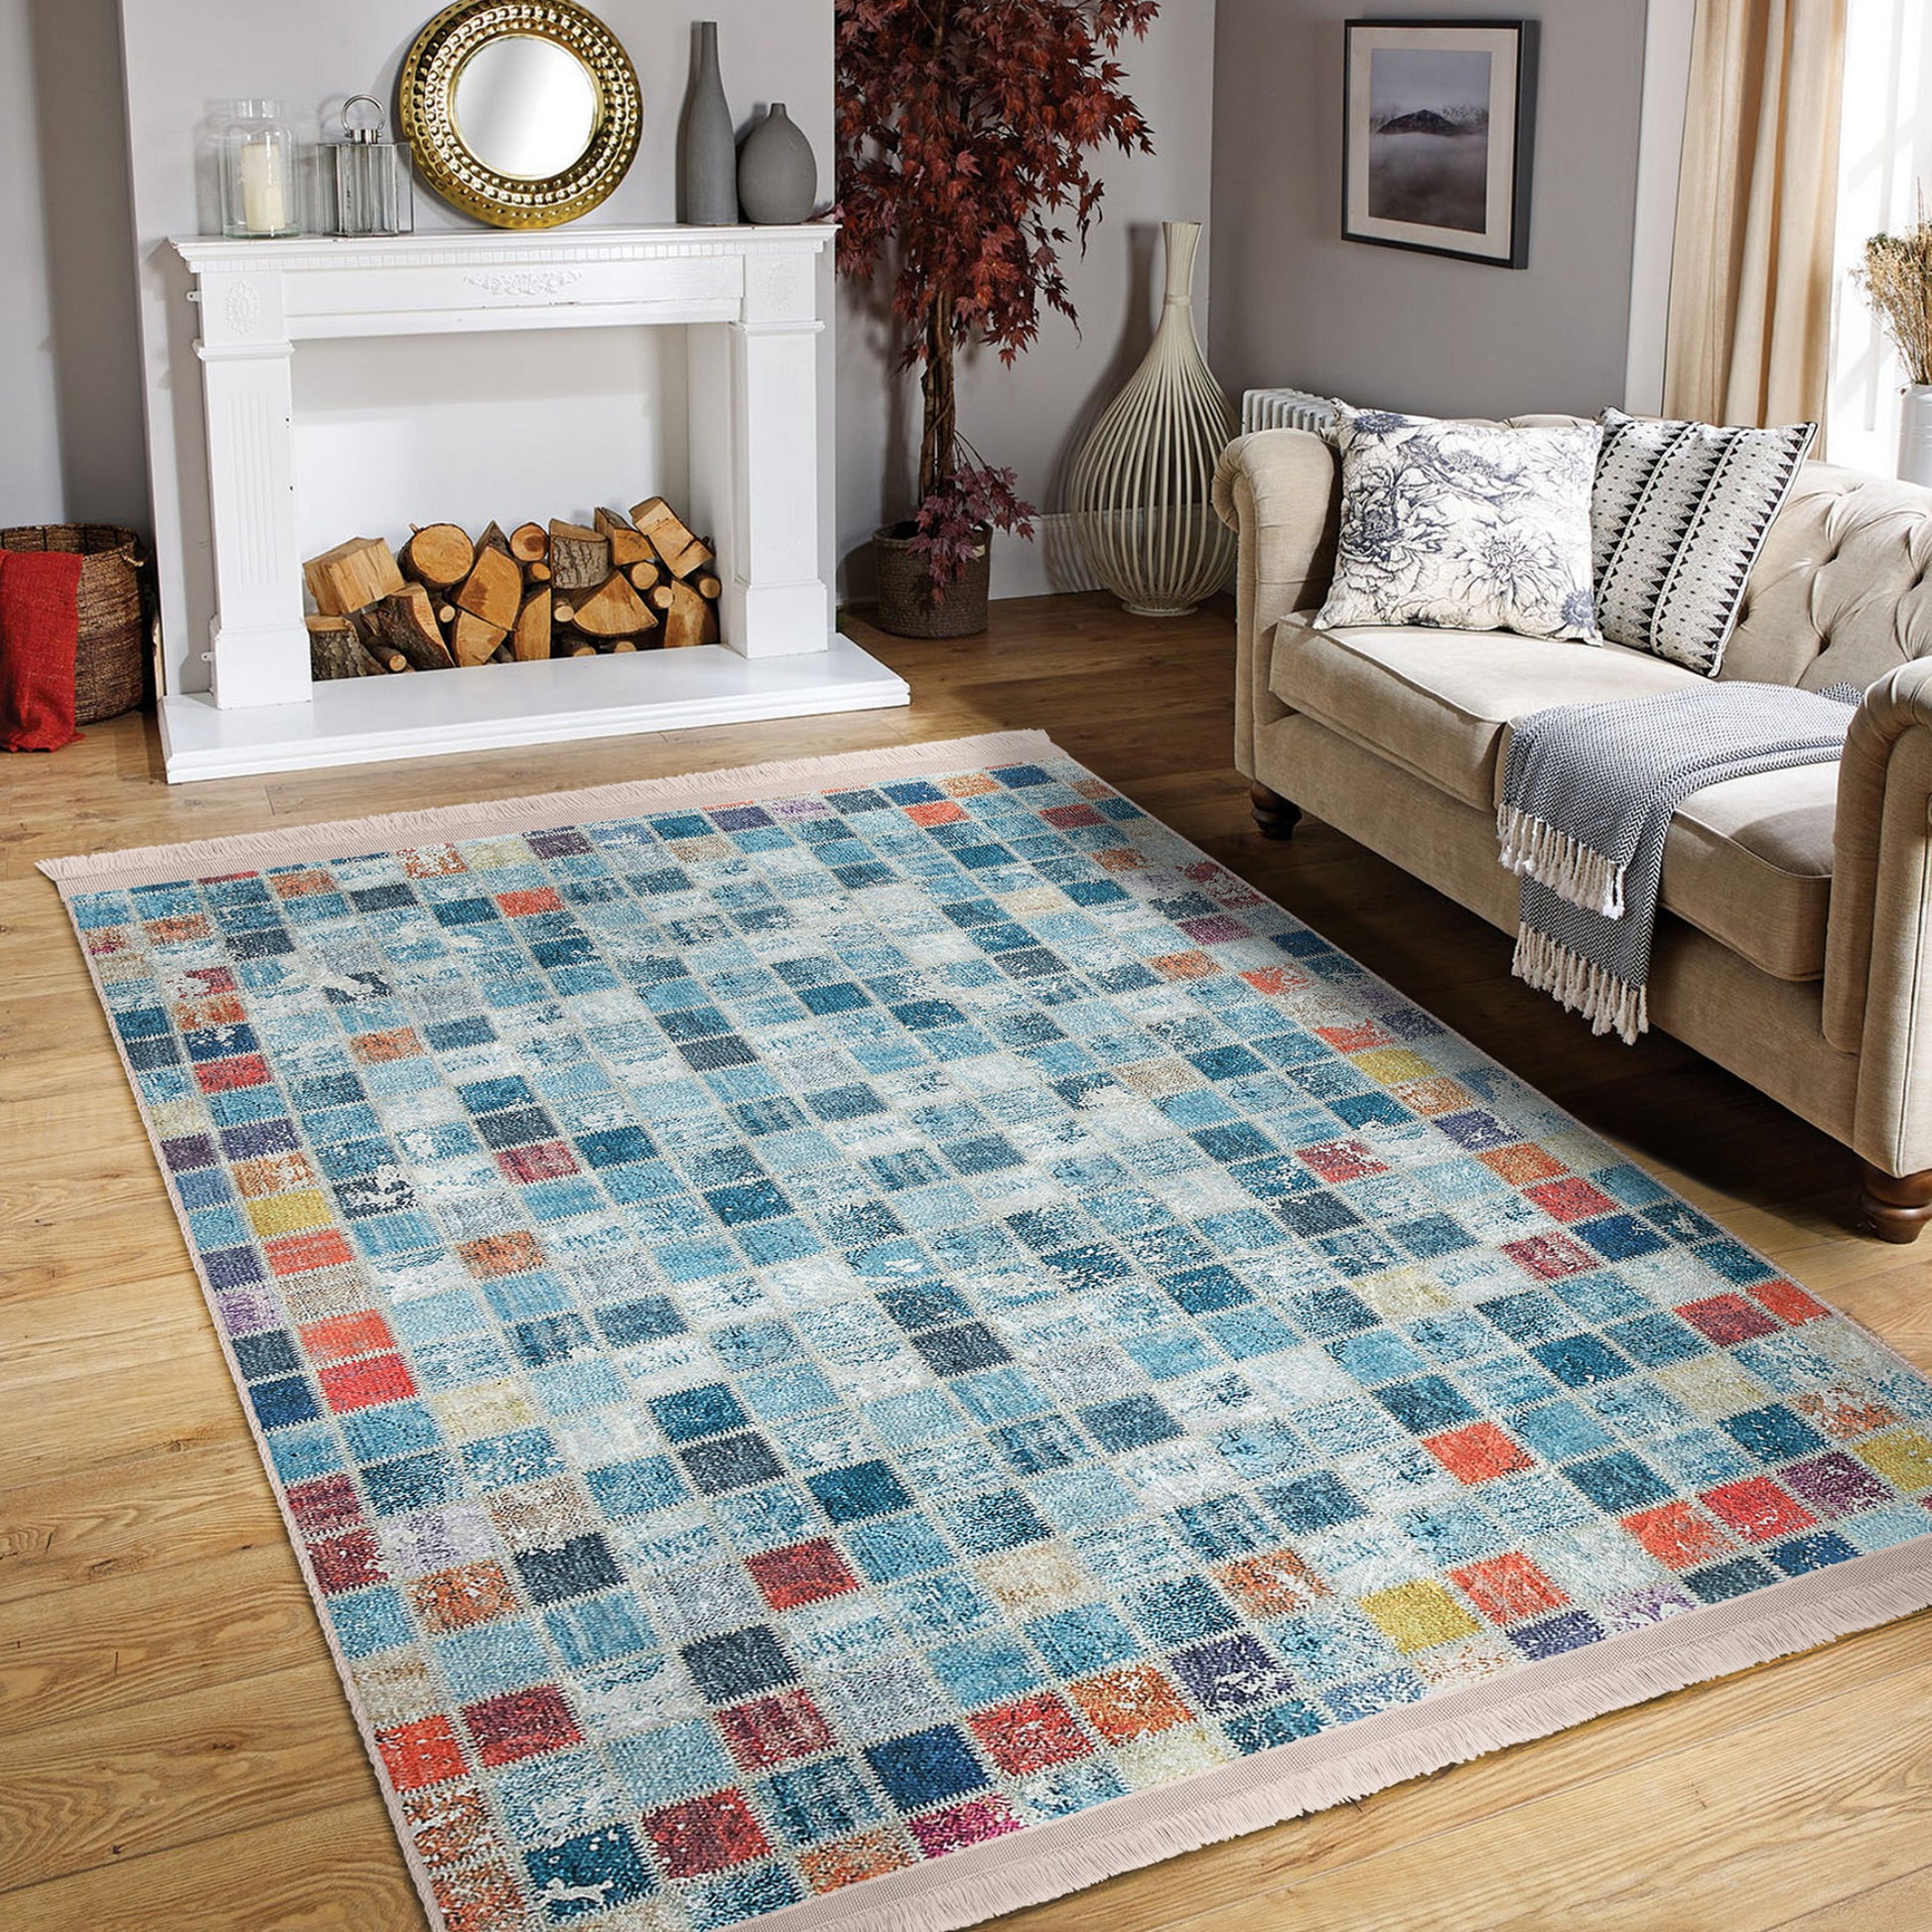 Farmhouse Checkered Rug with Country Elegance